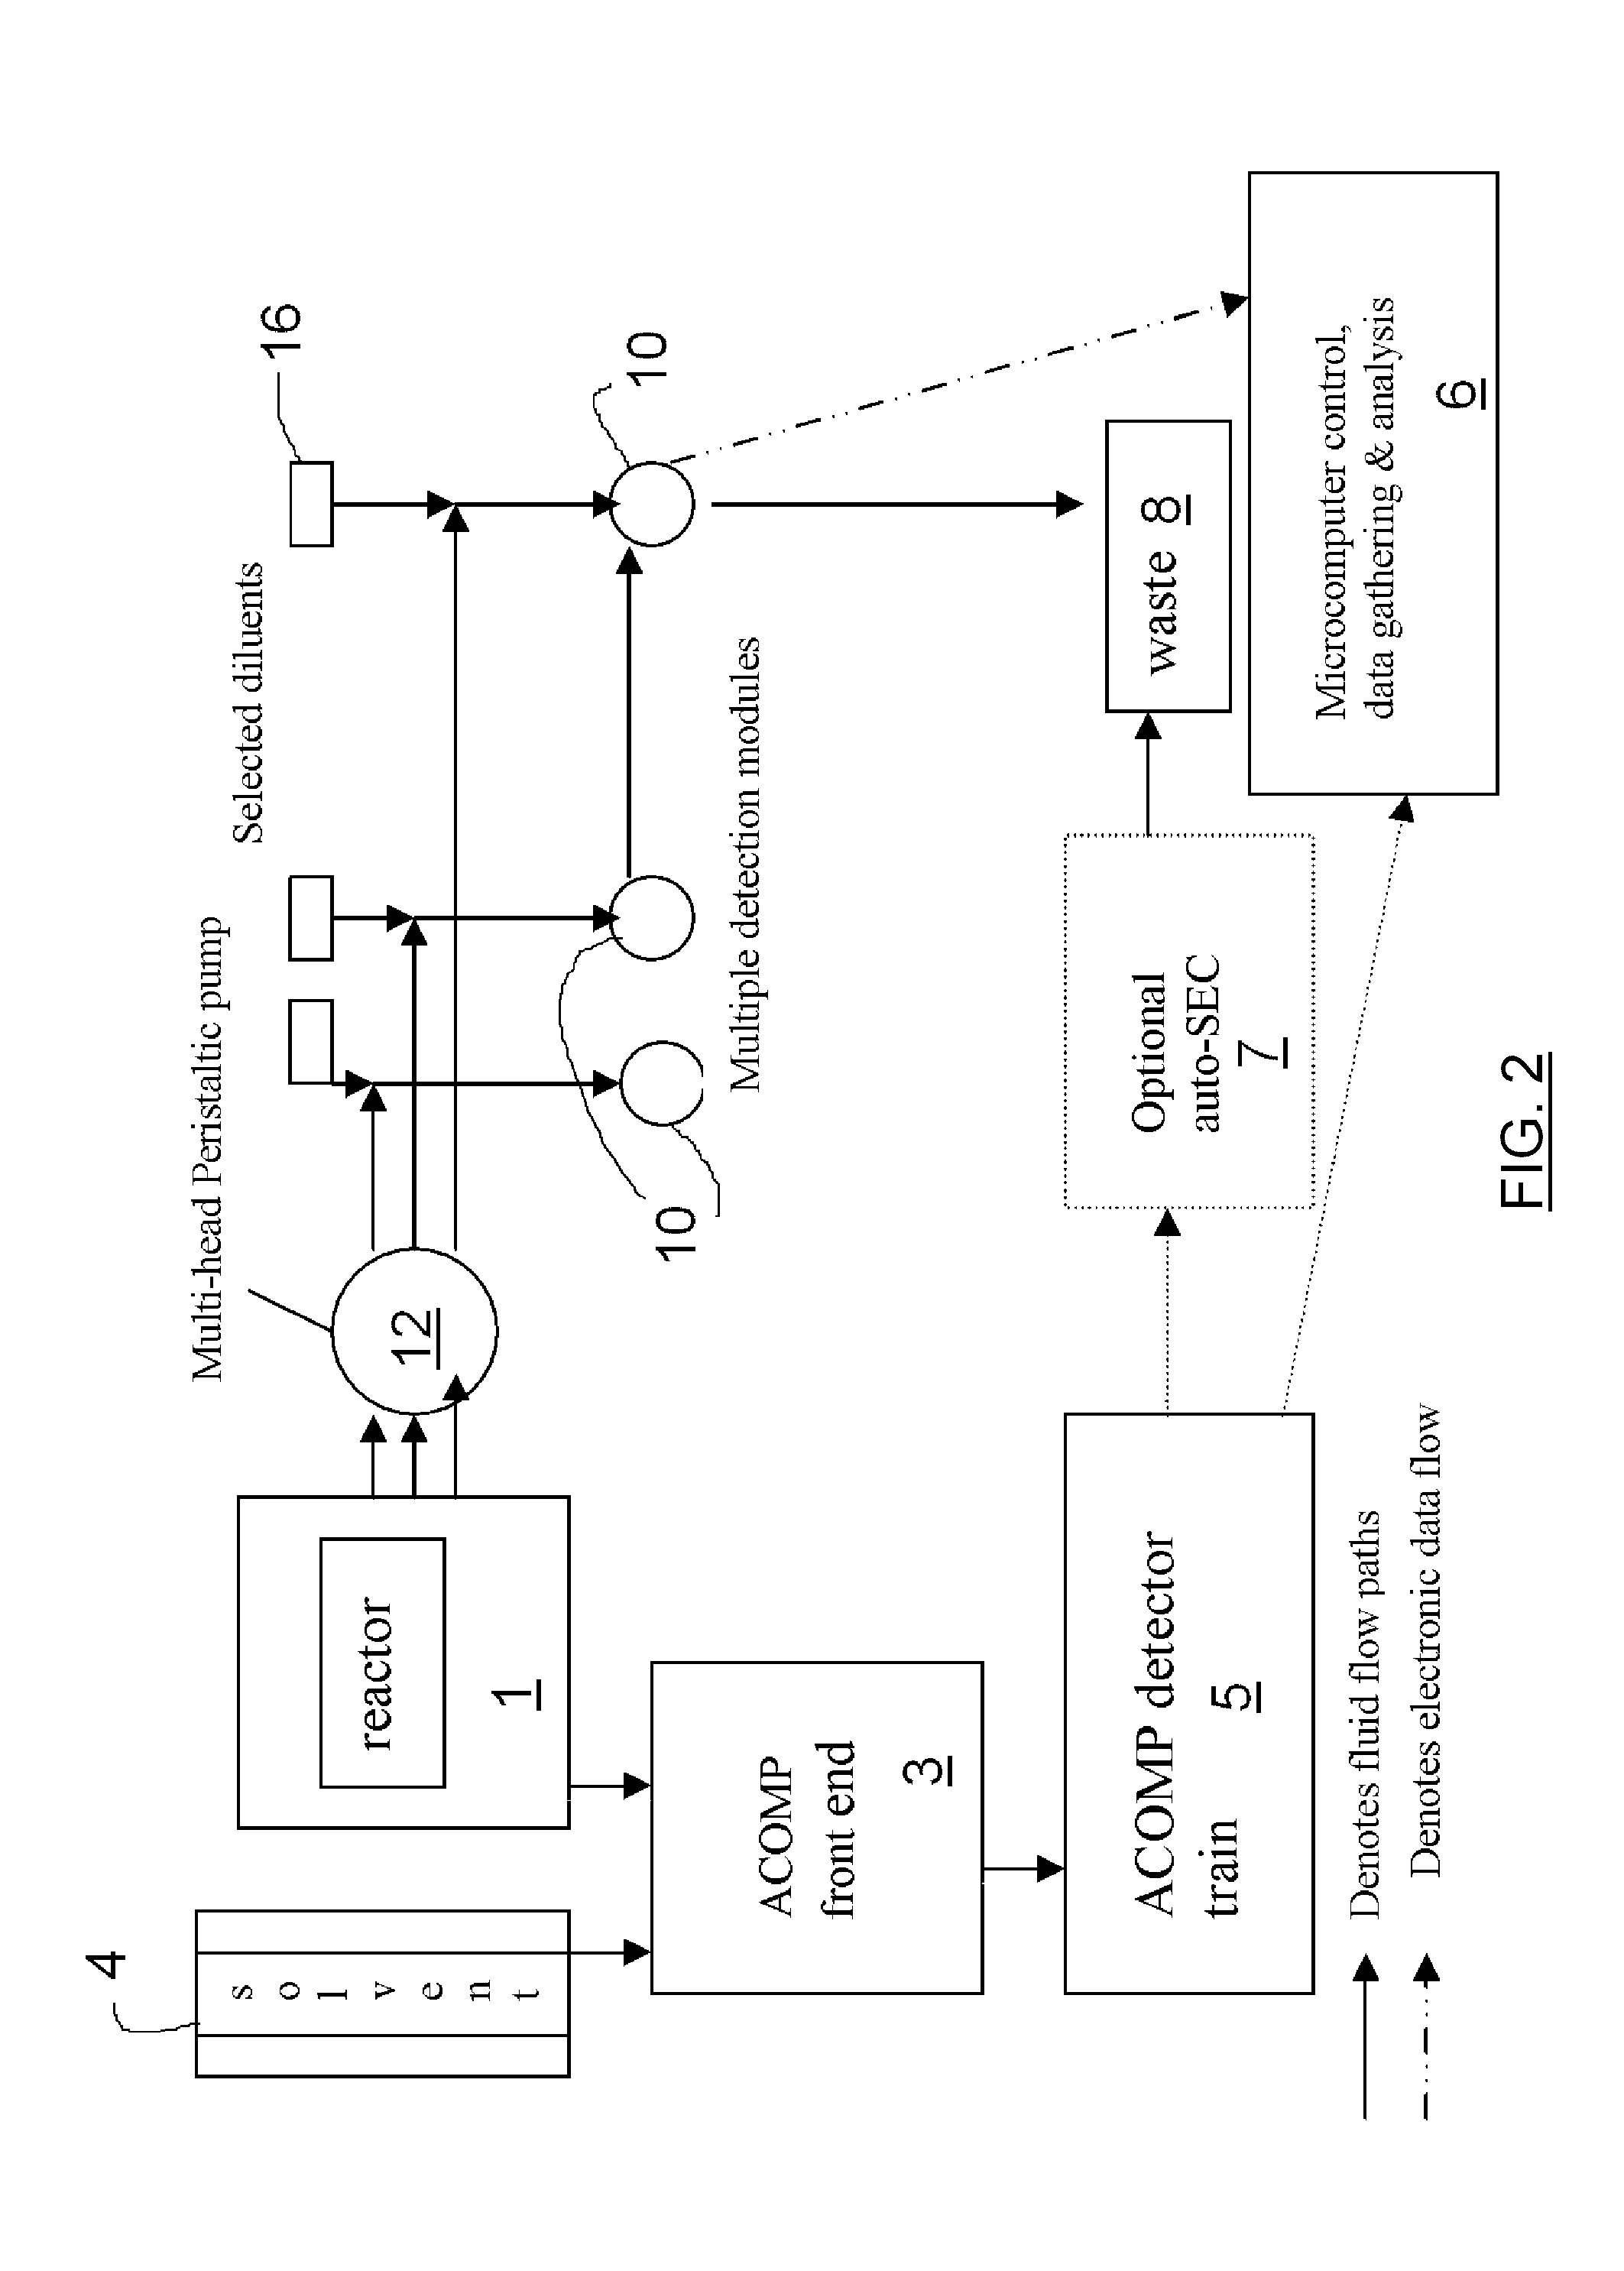 Methods and instrumentation for during-synthesis monitoring of polymer functional evolution